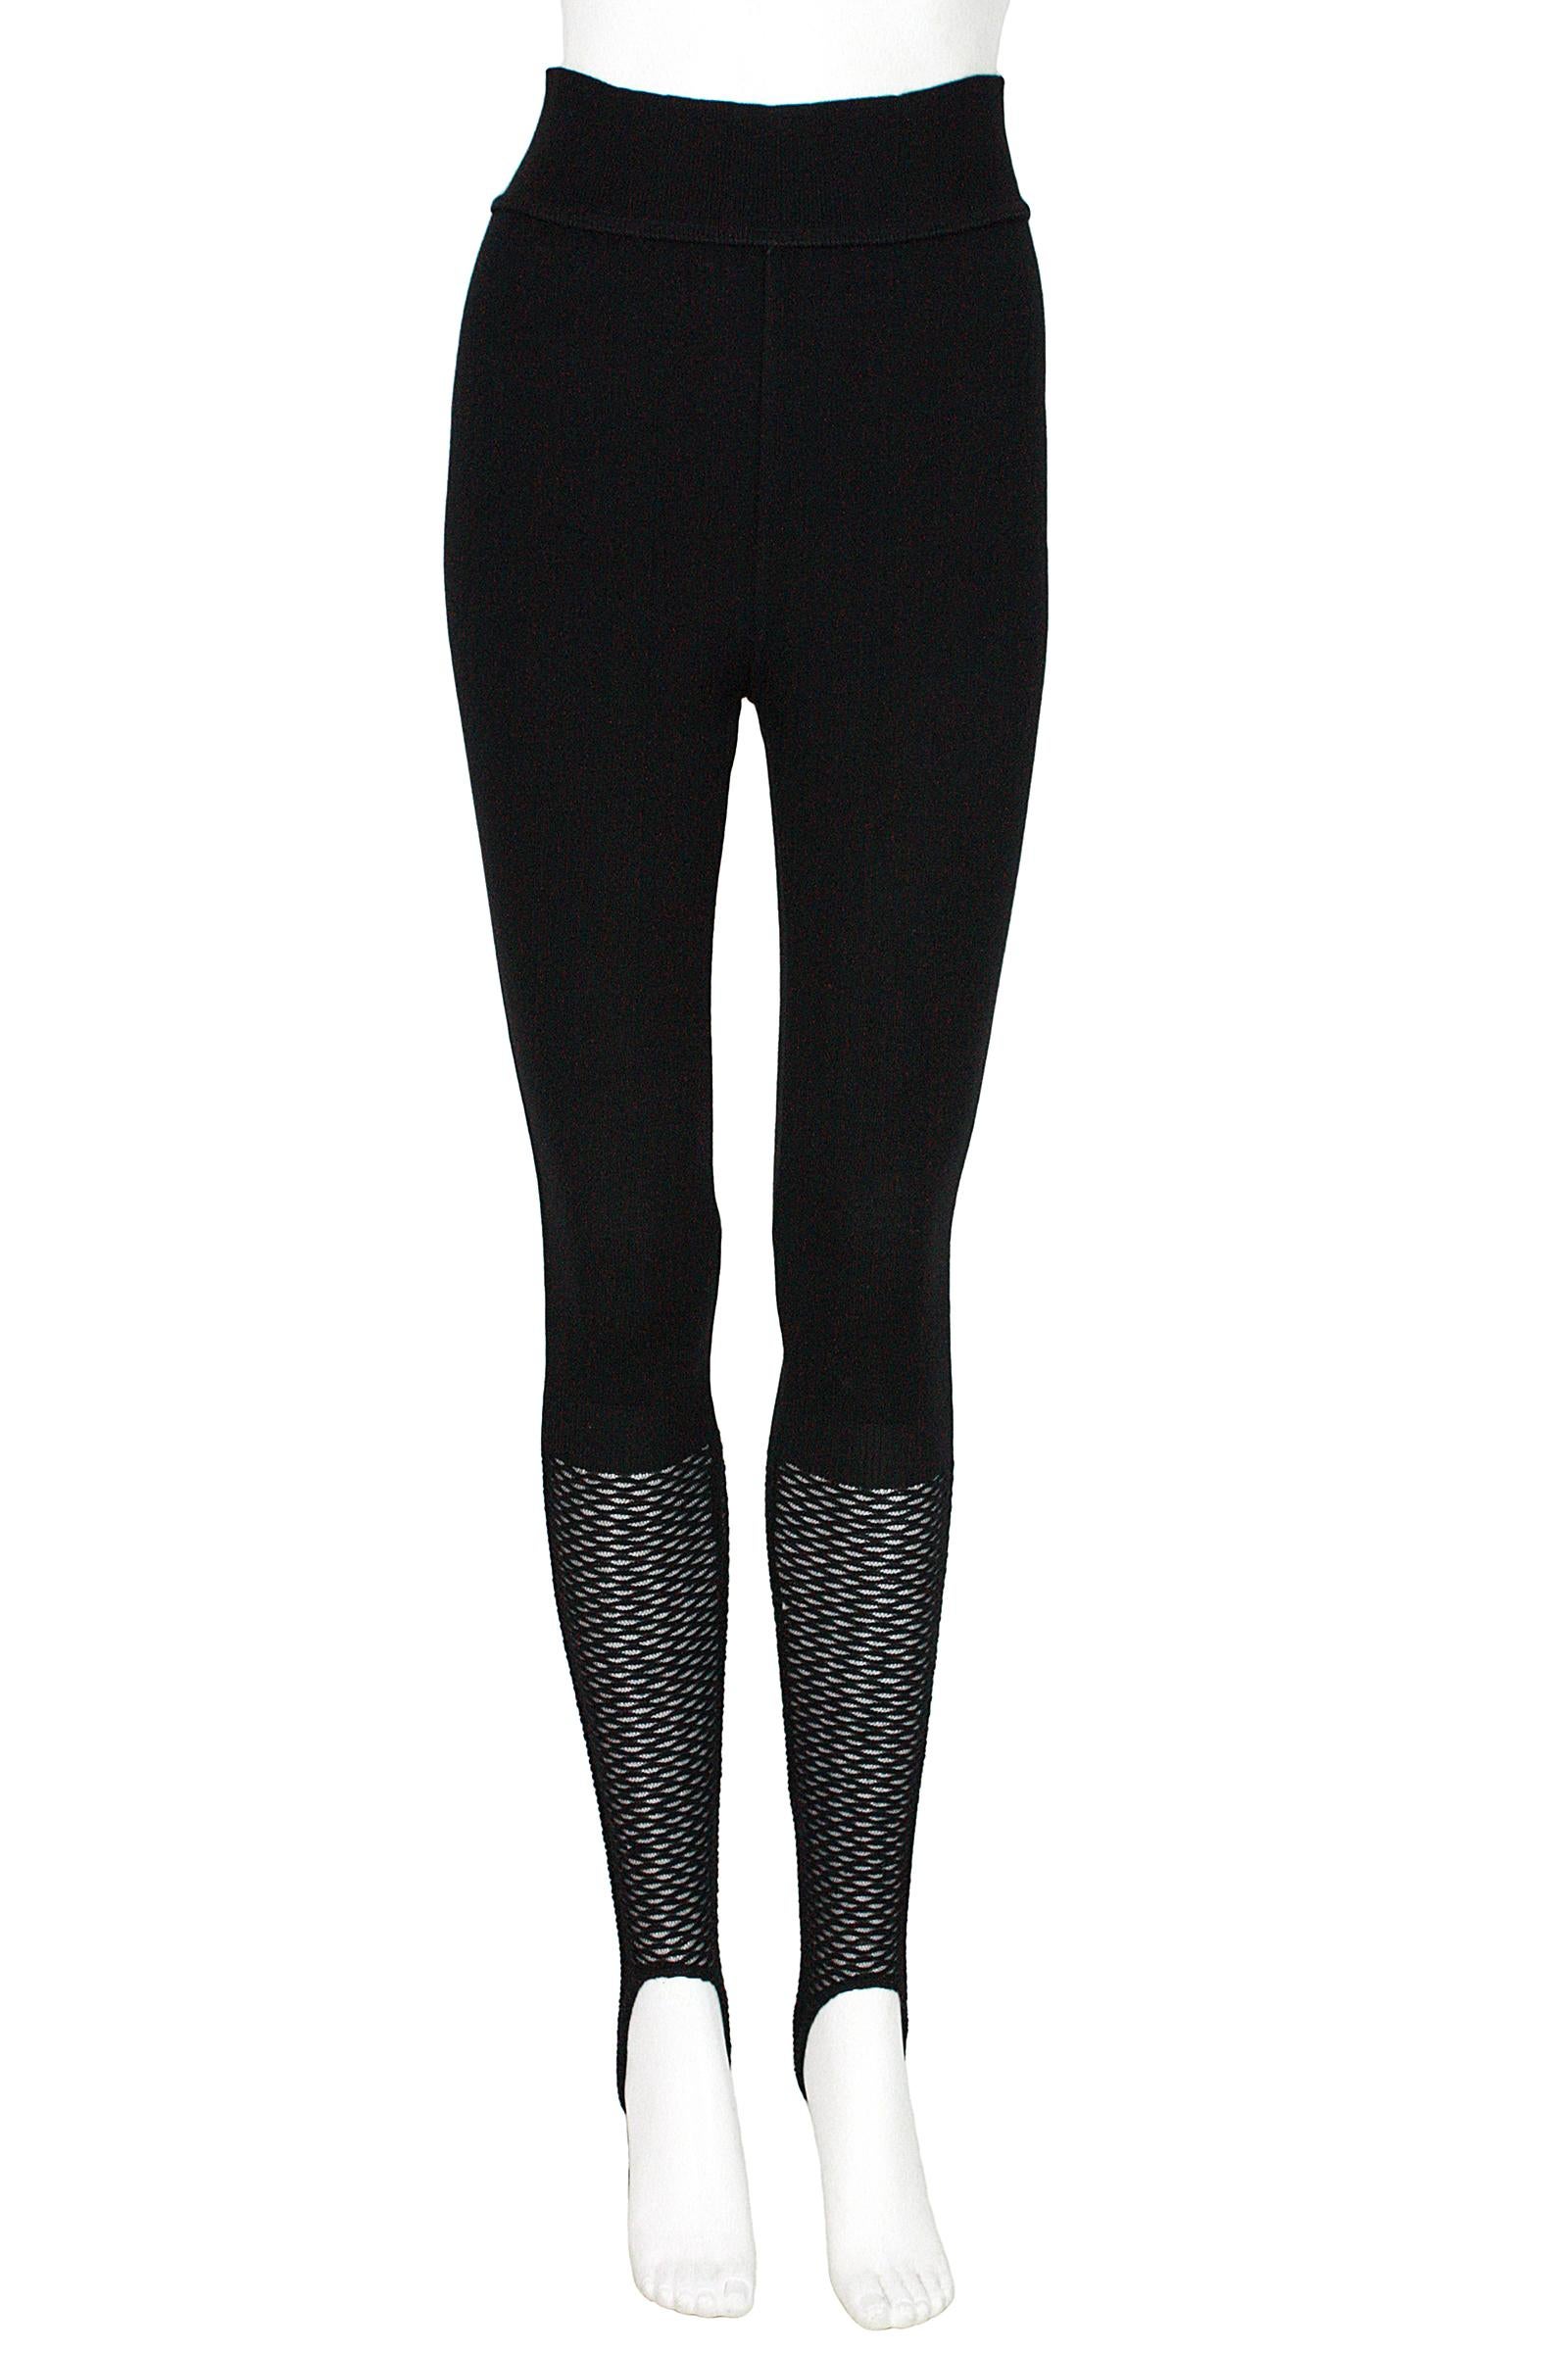 Alaïa stirrup leggings
Black thick knit wool blend 
Stretchy waistband 
Pull-on style  